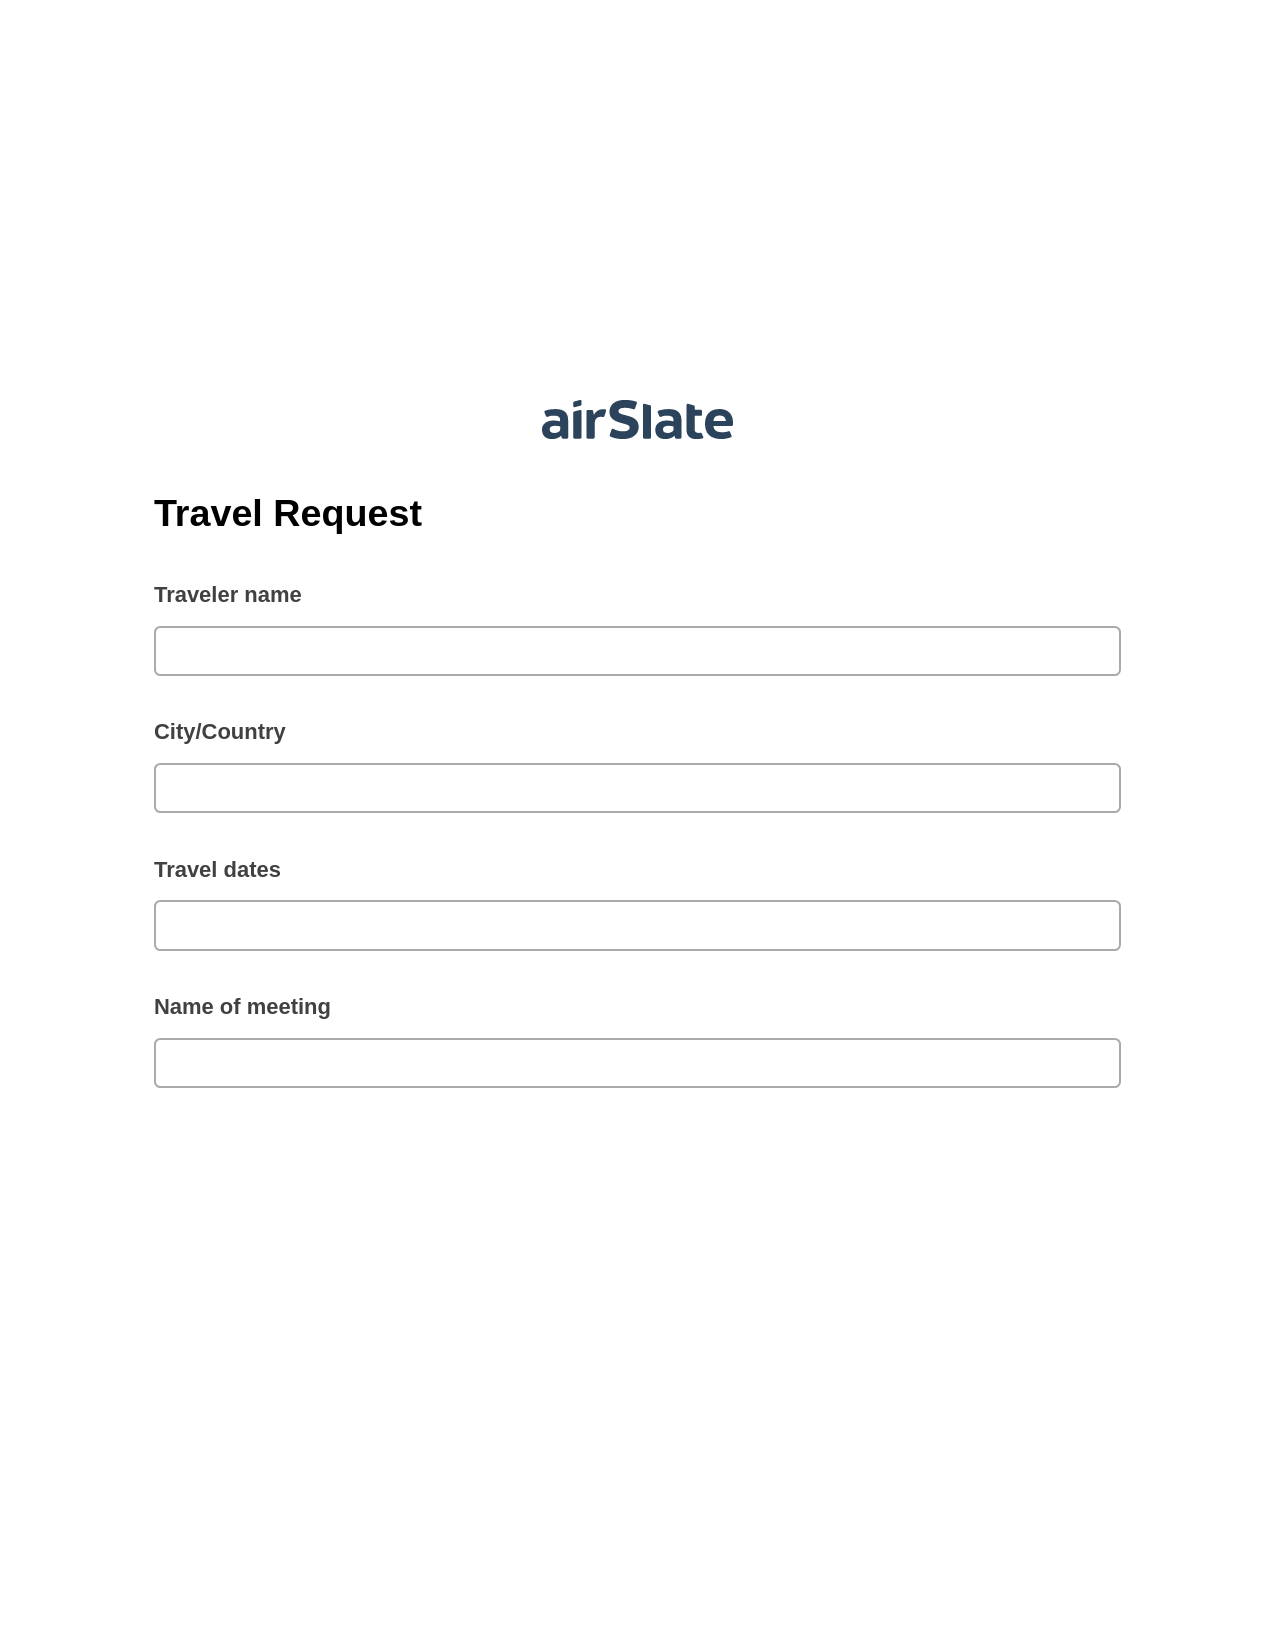 Travel Request Pre-fill from another Slate Bot, Create slate addon, Export to NetSuite Record Bot